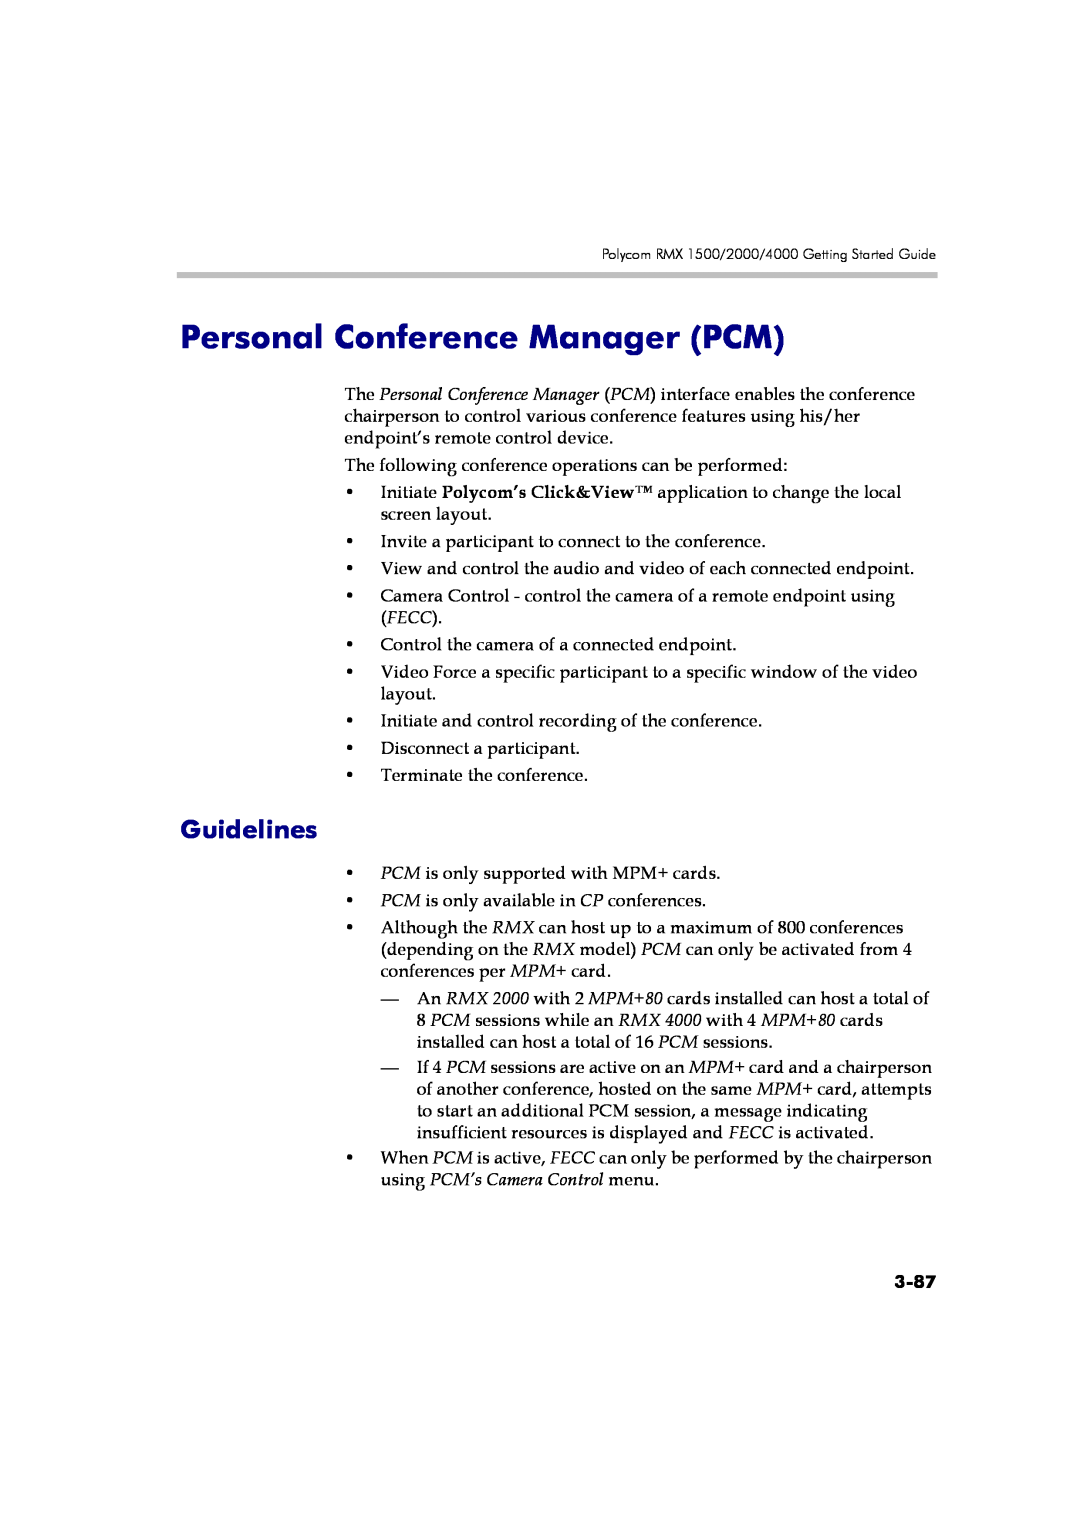 Polycom DOC2560A manual Personal Conference Manager PCM, Guidelines, 3-87 